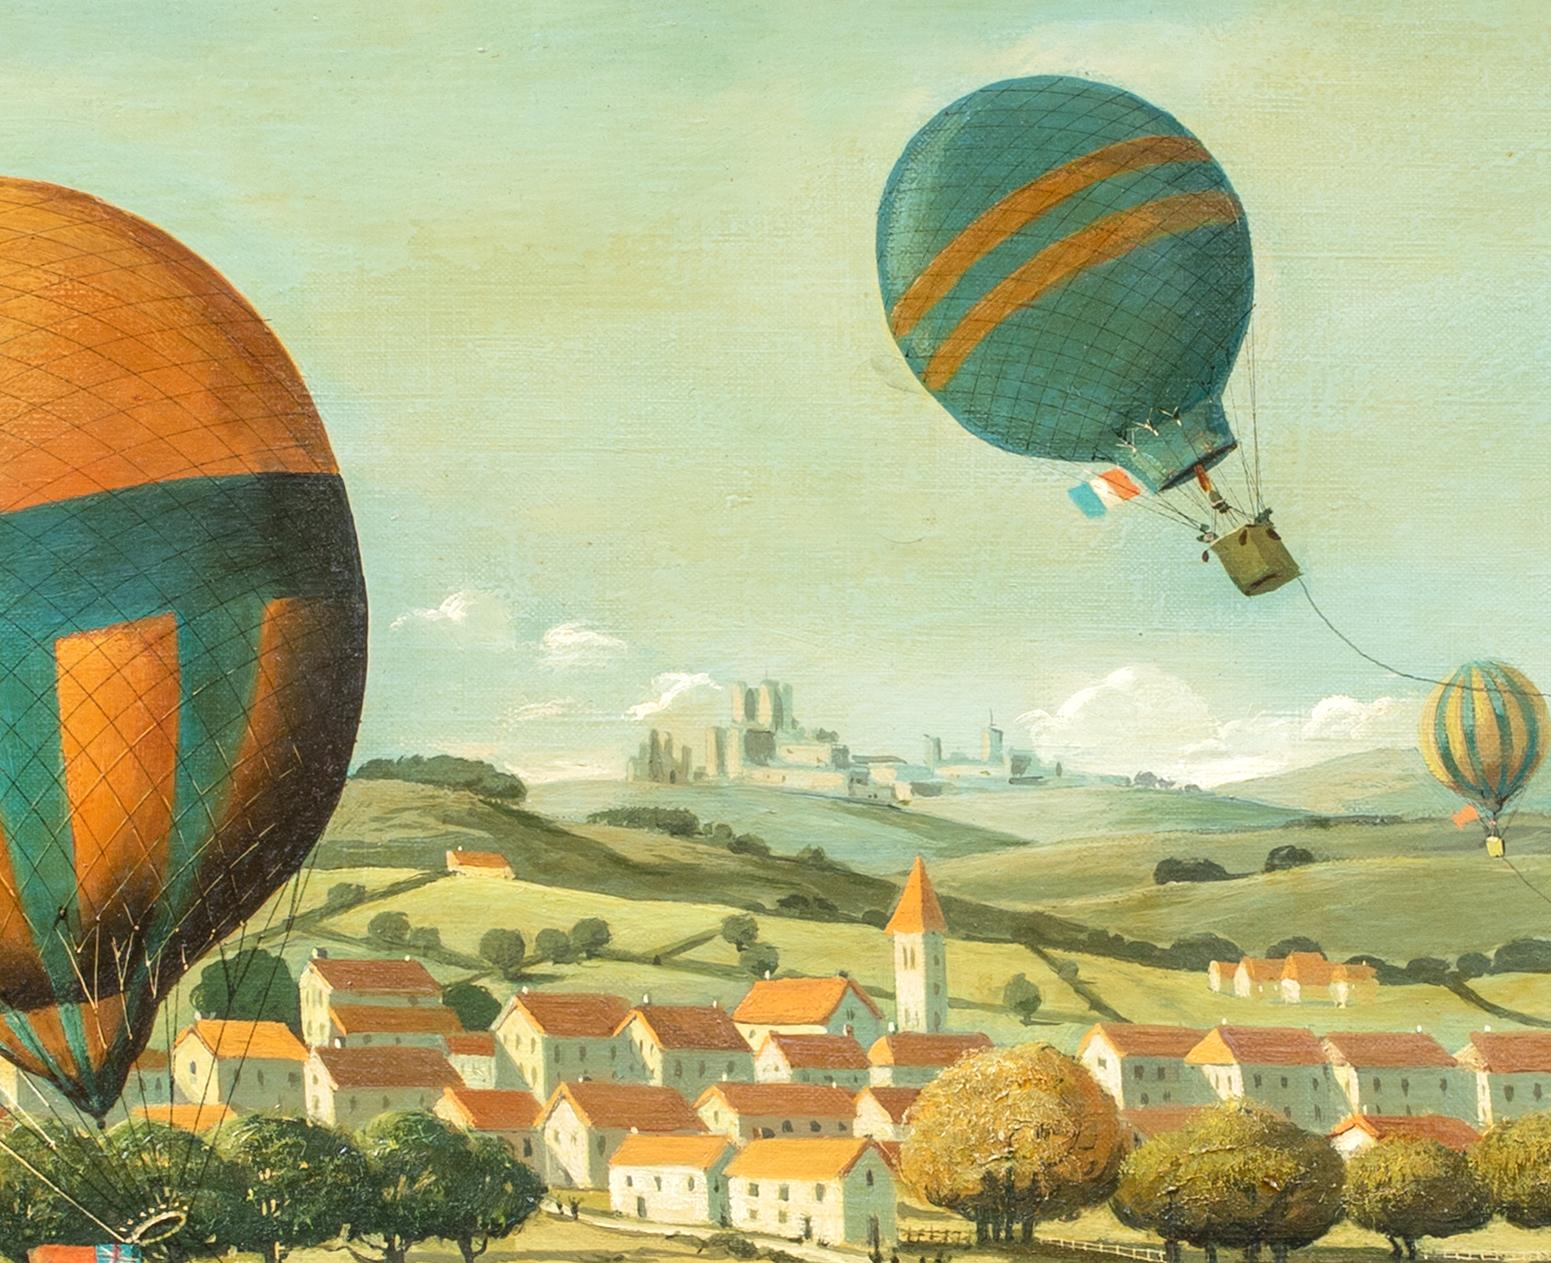 Hot Air Balloon Race Landscape, circa 1900  English School - signed W H NEWTON - Brown Landscape Painting by Unknown